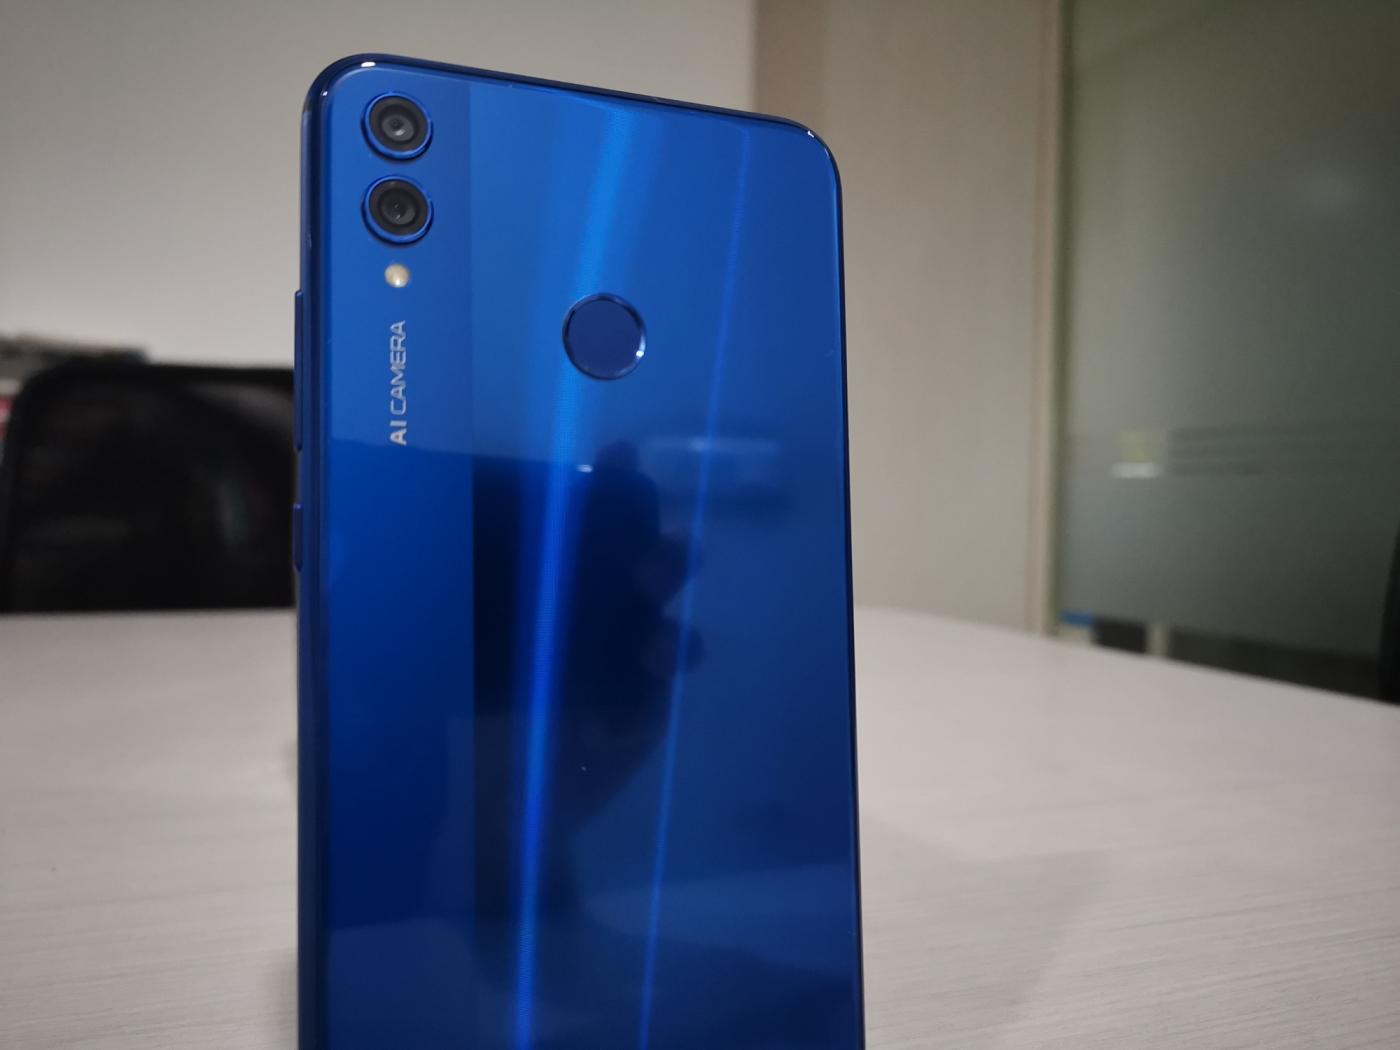 The Honor 8X comes in three variants -- 4GB+64GB, 6GB+64GB and 6GB+128GB -- priced Rs 14,999, Rs 16,999 and Rs 18,999, respectively. by .